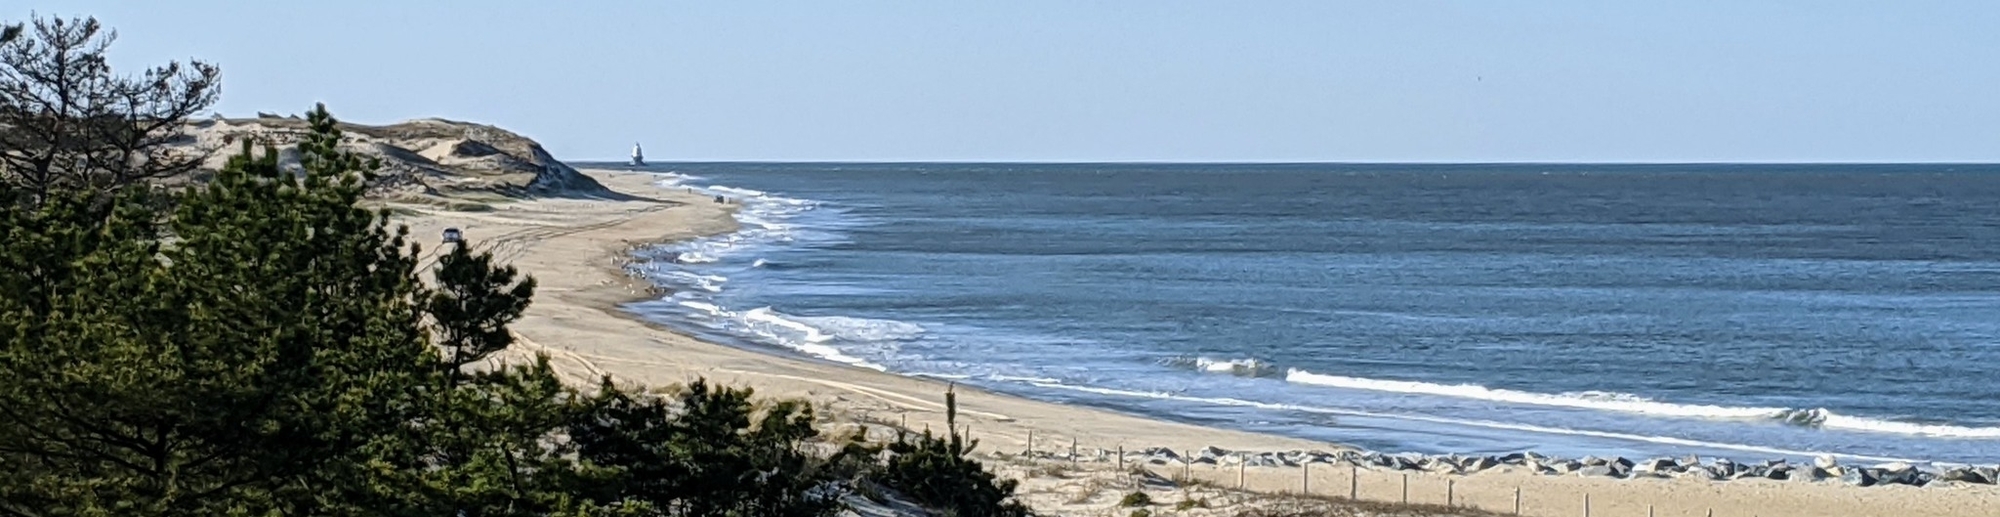 A view of the beach at Cape Henlopen